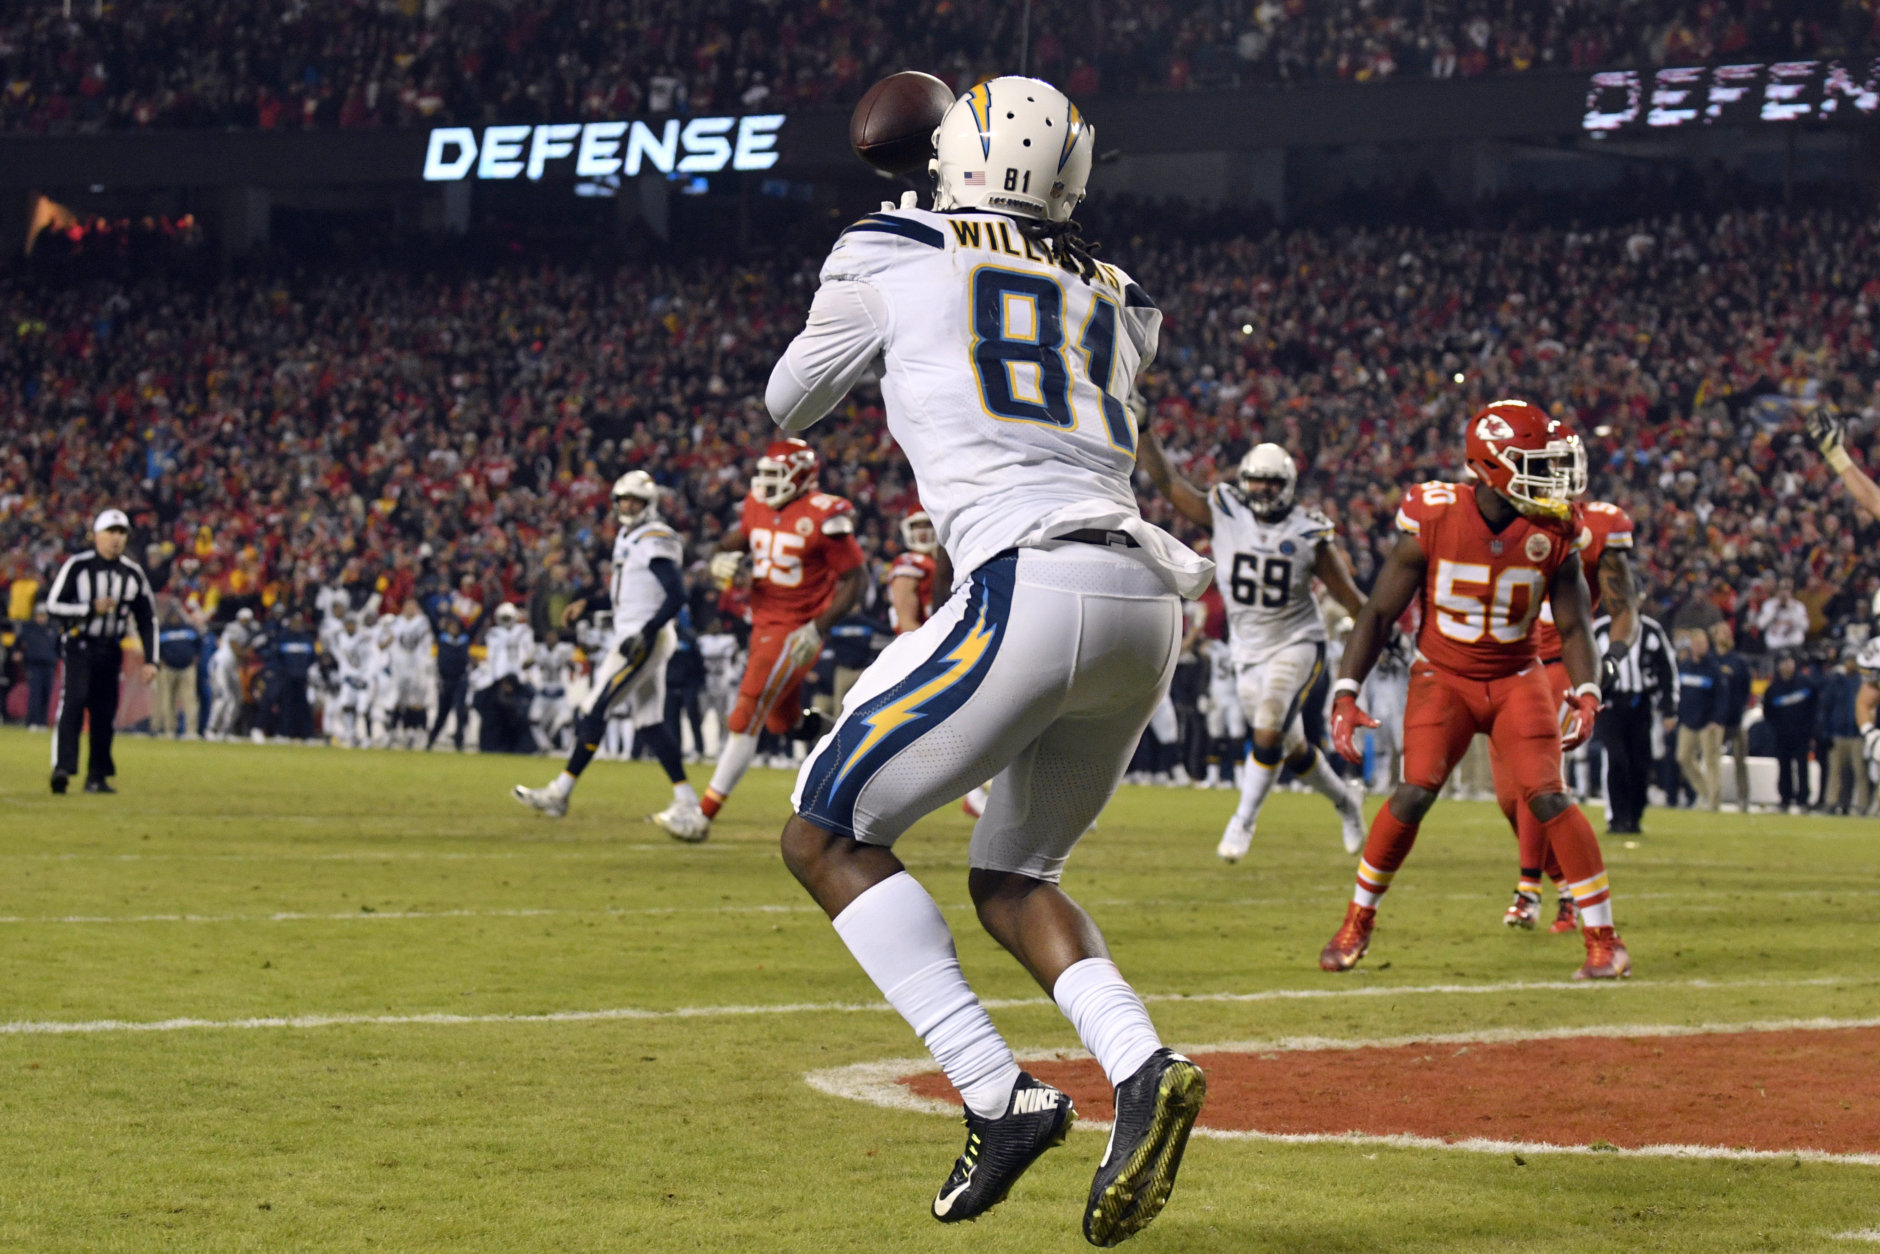 Los Angeles Chargers wide receiver Mike Williams (81) catches a two-point conversion for the win against the Kansas City Chiefs during the second half of an NFL football game in Kansas City, Mo., Thursday, Dec. 13, 2018. The Los Angeles Chargers won 29-28. (AP Photo/Ed Zurga)